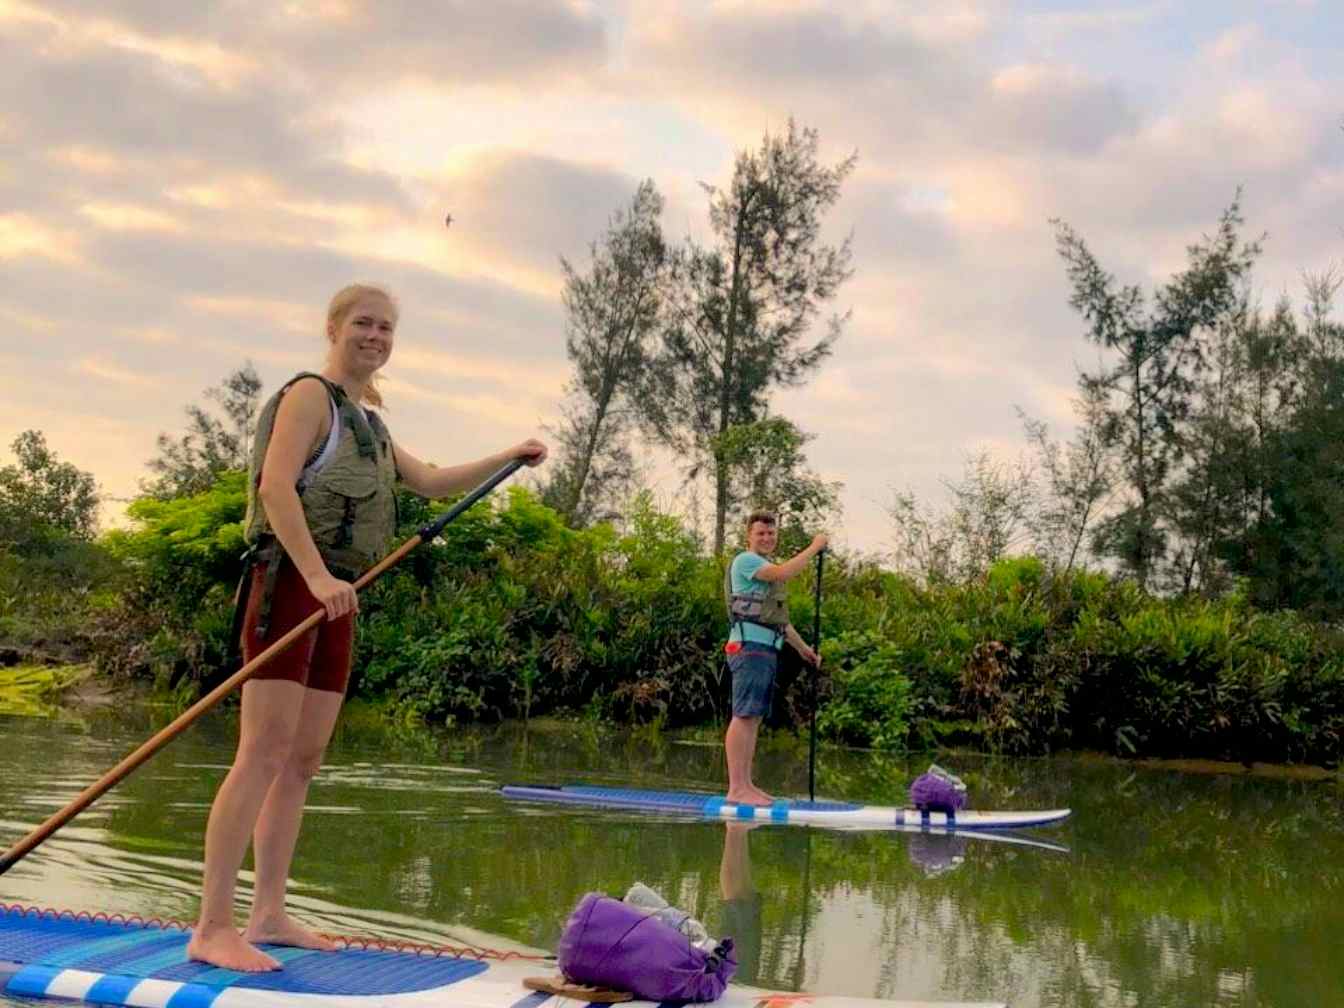 SUP on a river in Hoi An, Vietnam. Photo: Host/EAsia Active